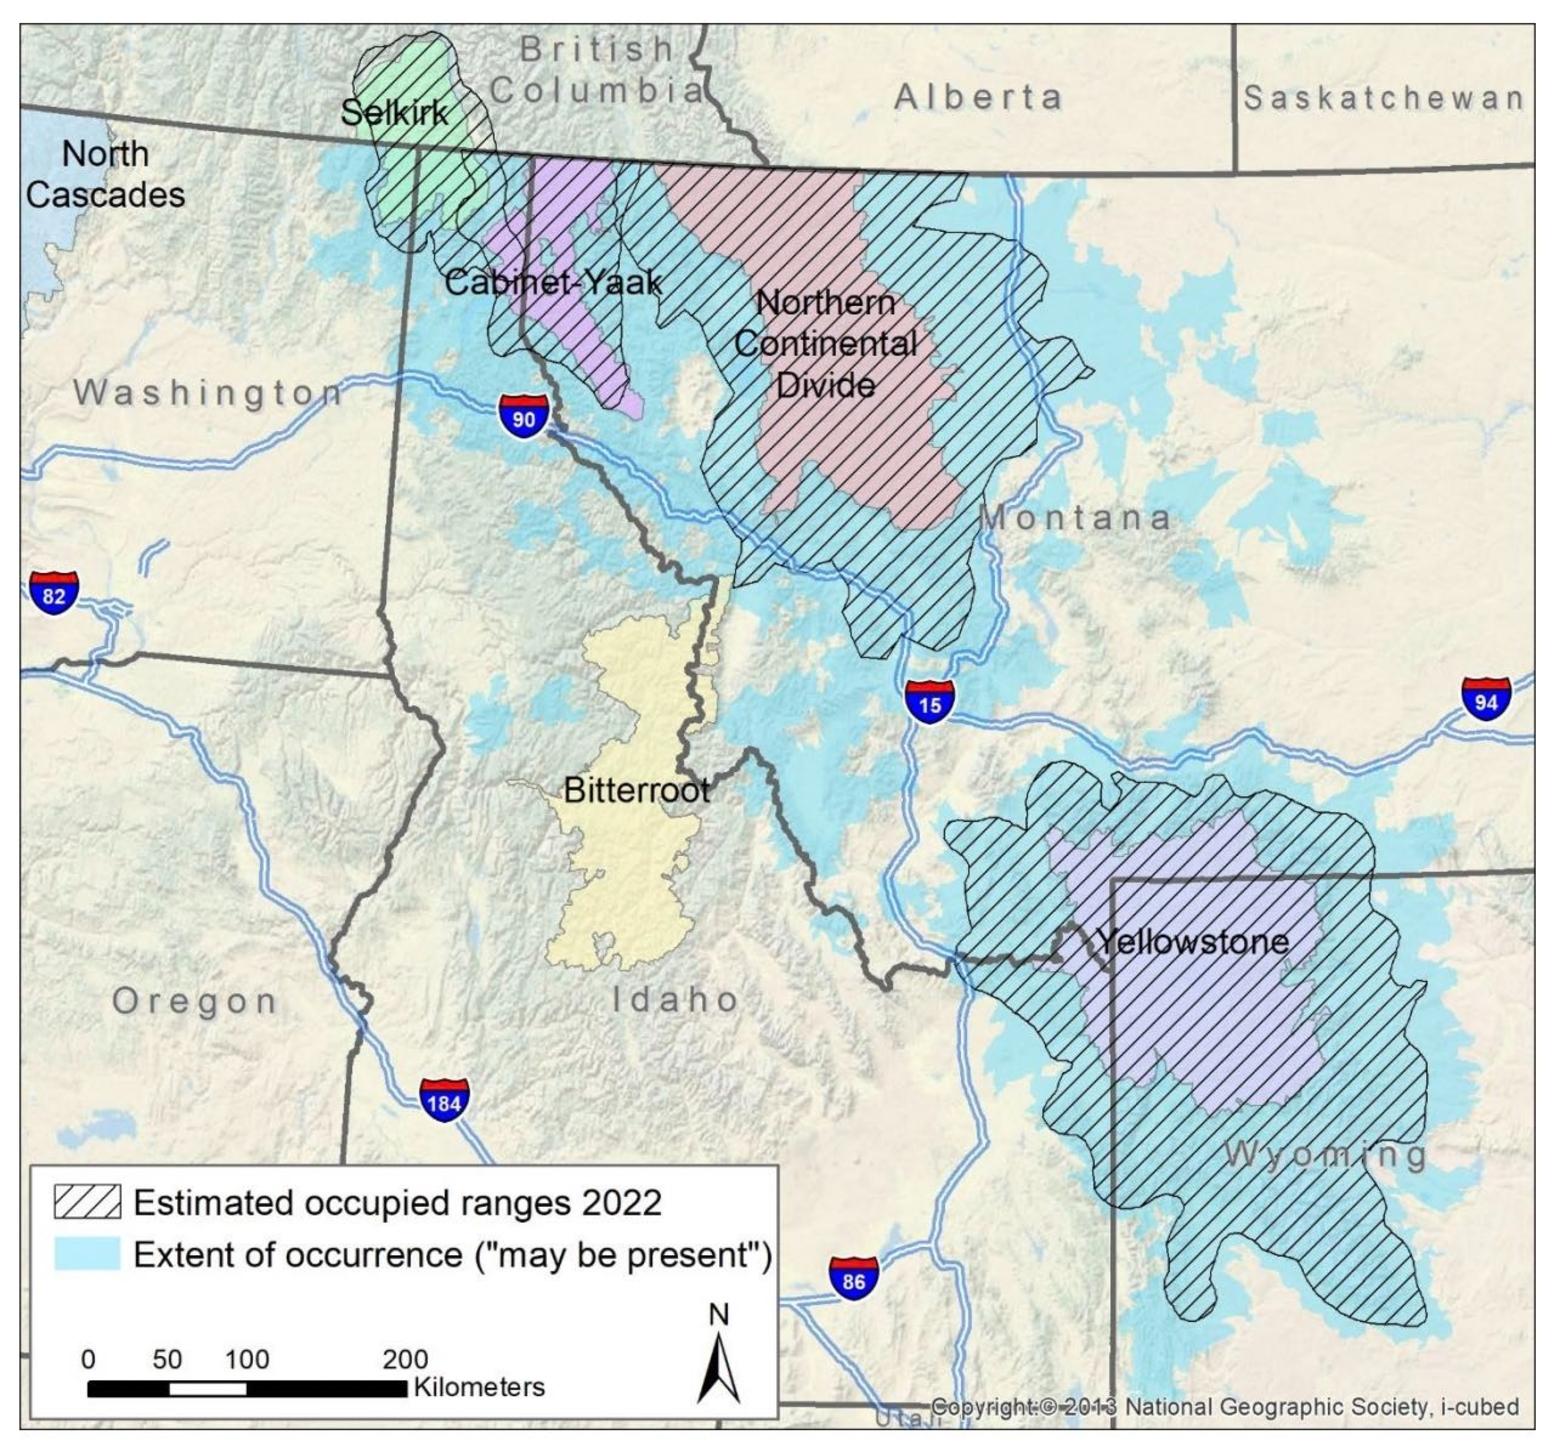 Montana’s latest grizzly management plan uses "estimated occupied range maps" to identify “core” zones, outside of which FWP will not prioritize maintaining a grizzly population. Use of a broader where grizzlies "may-be-present” map (shown above) would provide a more accurate portrayal of grizzly dispersal to guide management efforts, says Dr. Chris Servheen. Map courtesy FWP